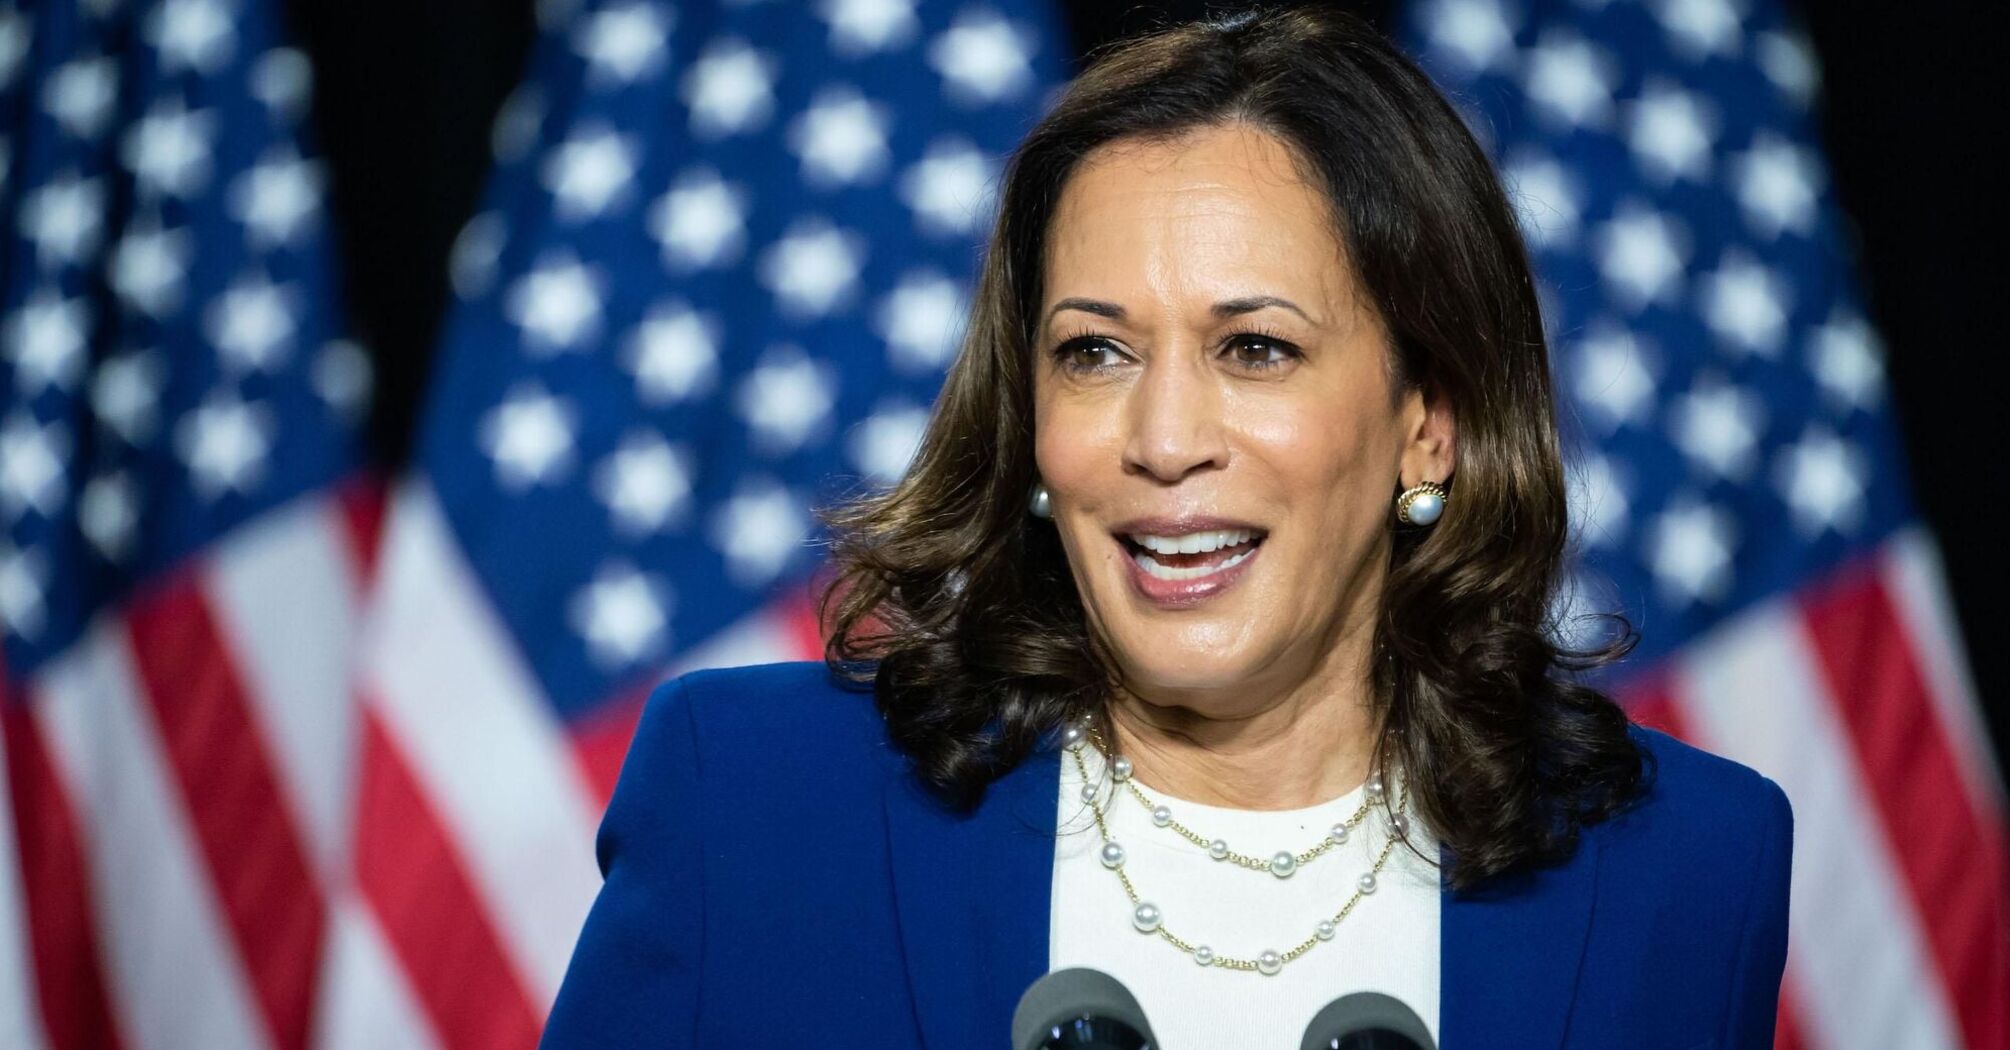 Can Harris beat Trump in the US election: poll results